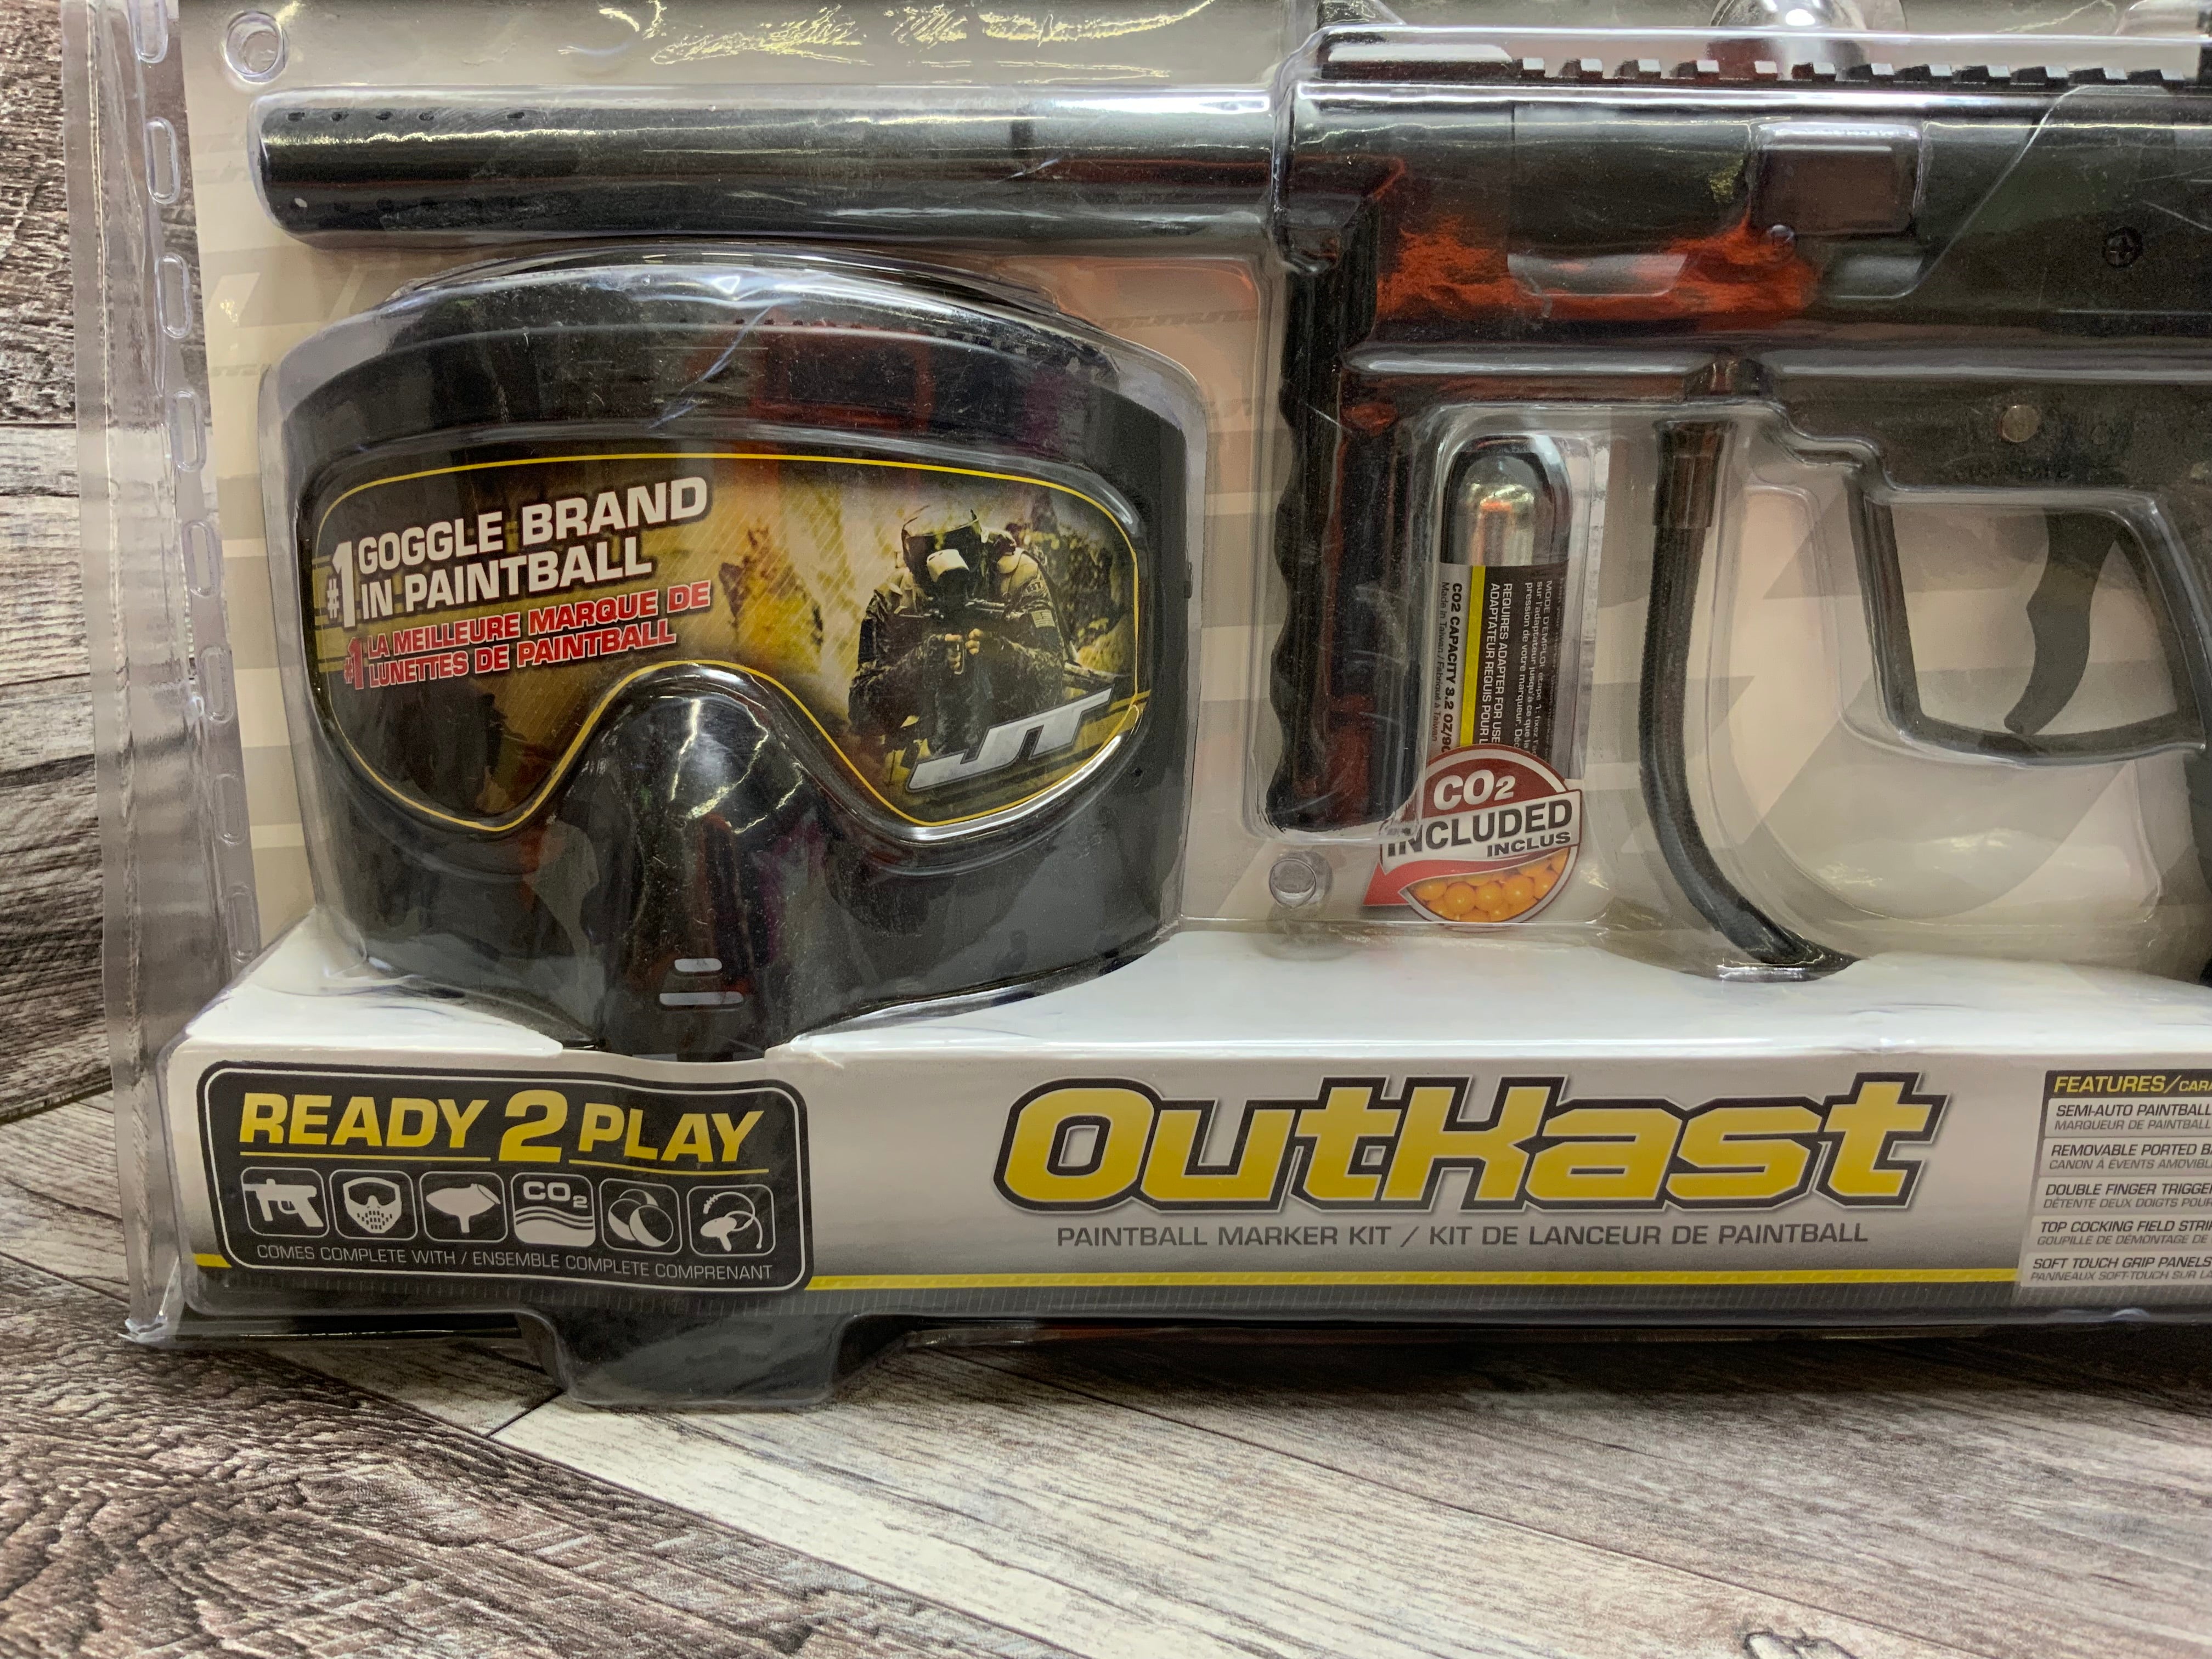 JT Outkast Paintball Gun RTP Ready to Play Kit With Marker,Mask,Paint,Tank Etc (8066860056814)